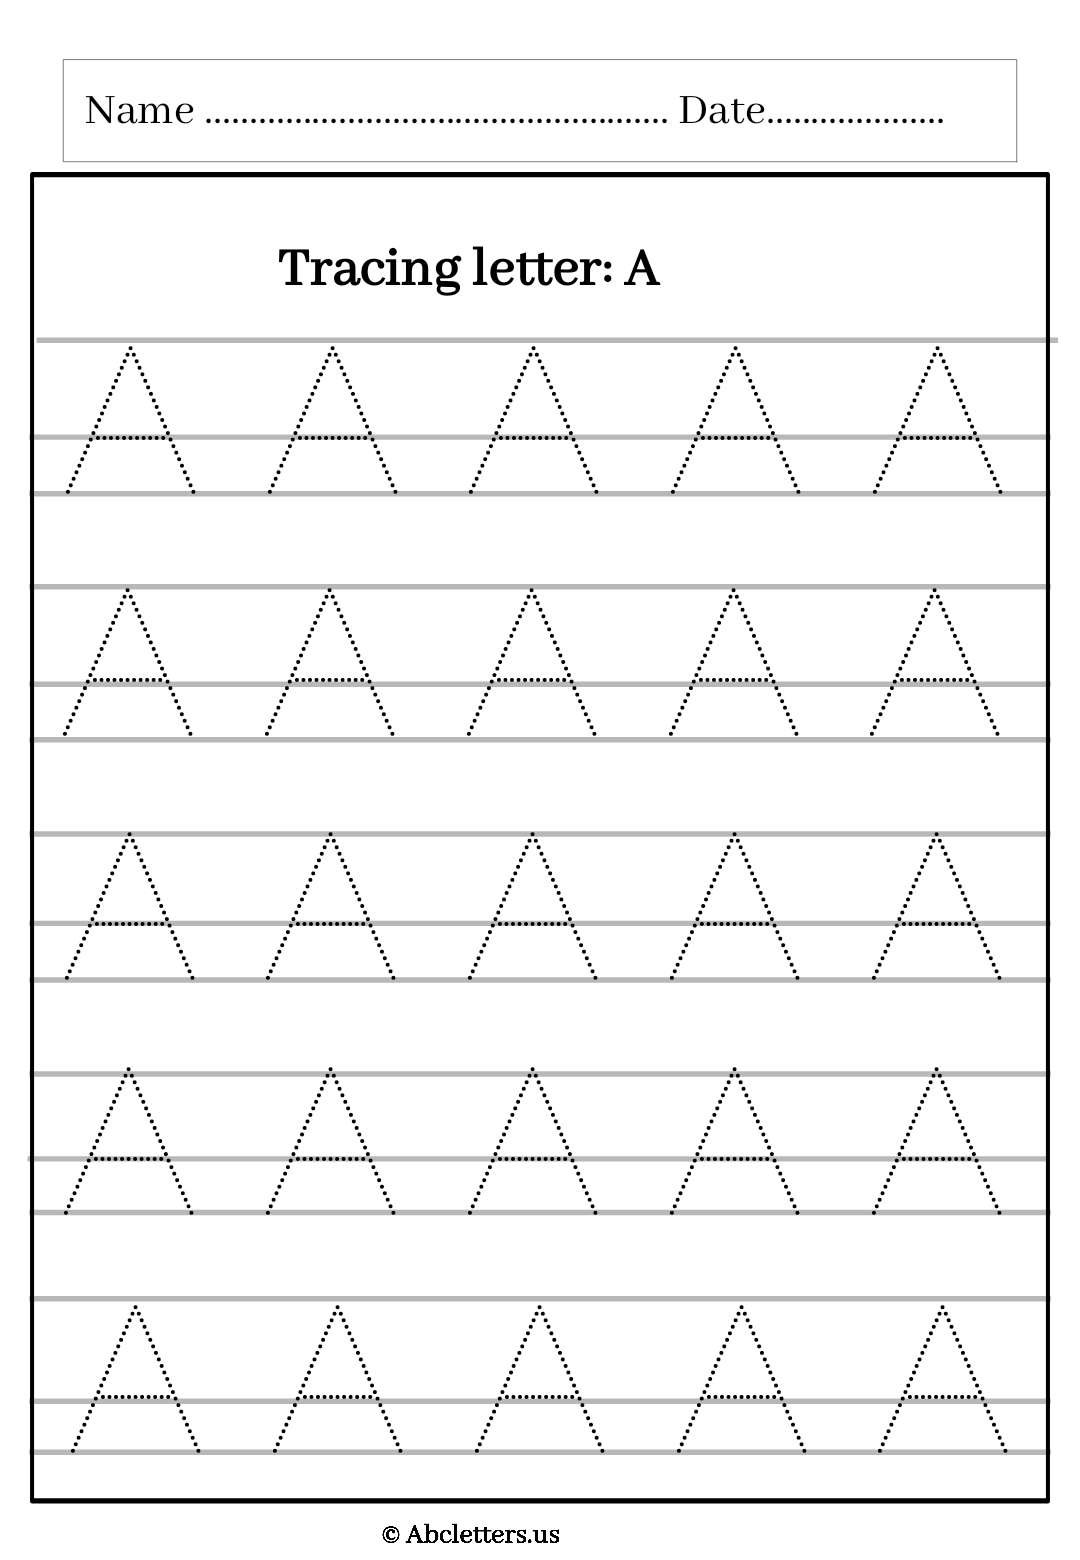 Tracing letter uppercase A with 3 line